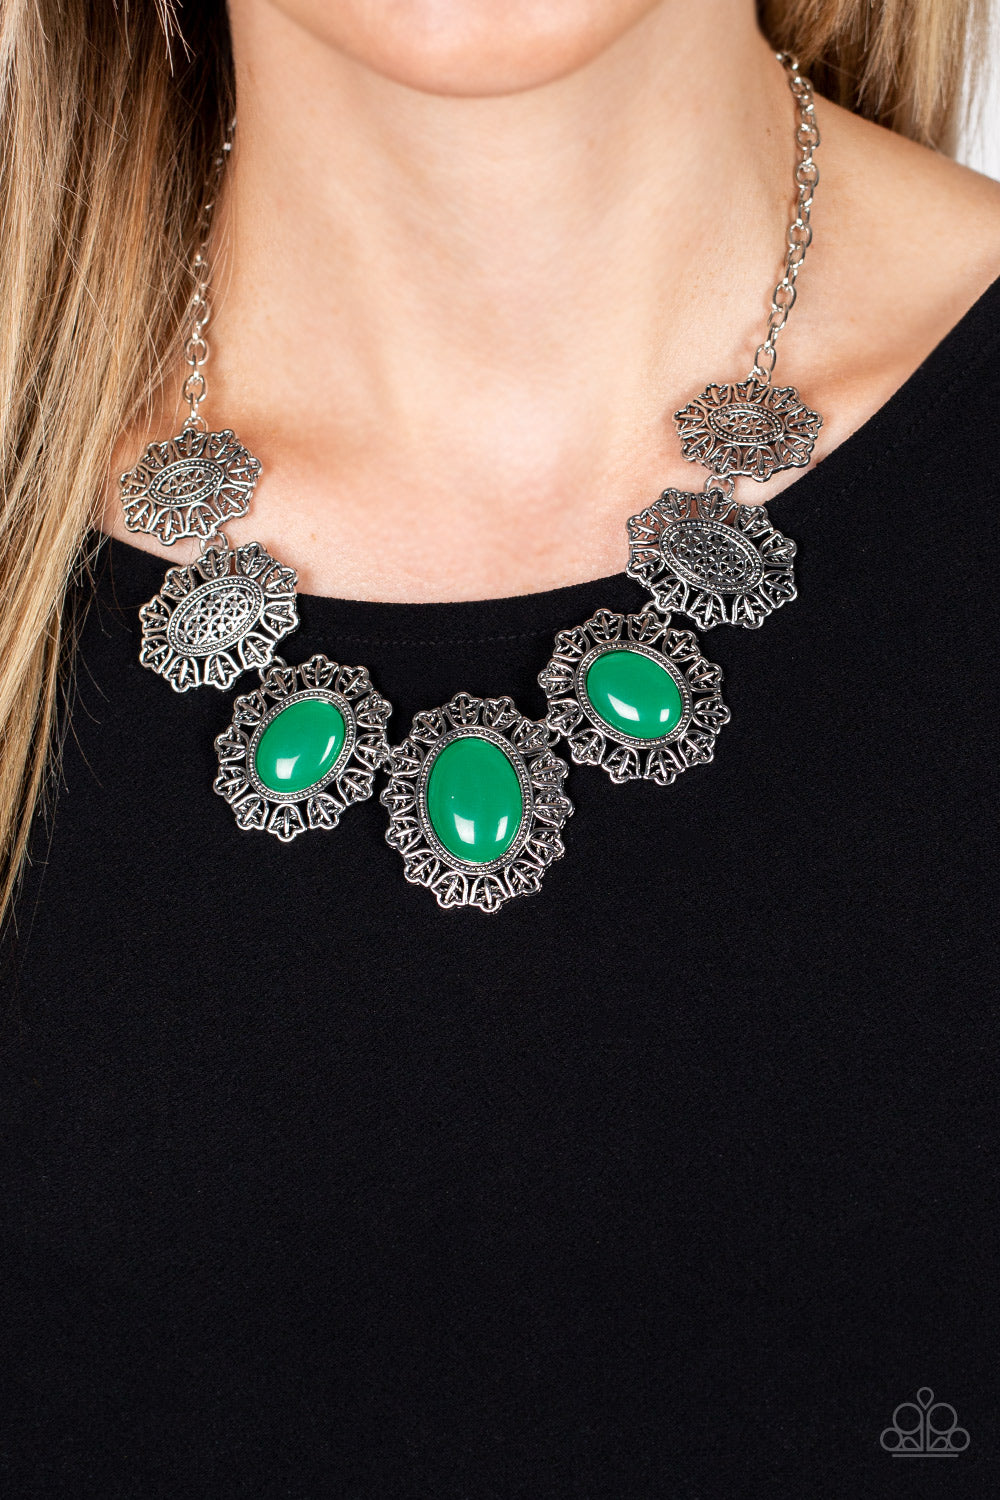 Paparazzi ♥ Forever and EVERGLADE - Green ♥ Necklace